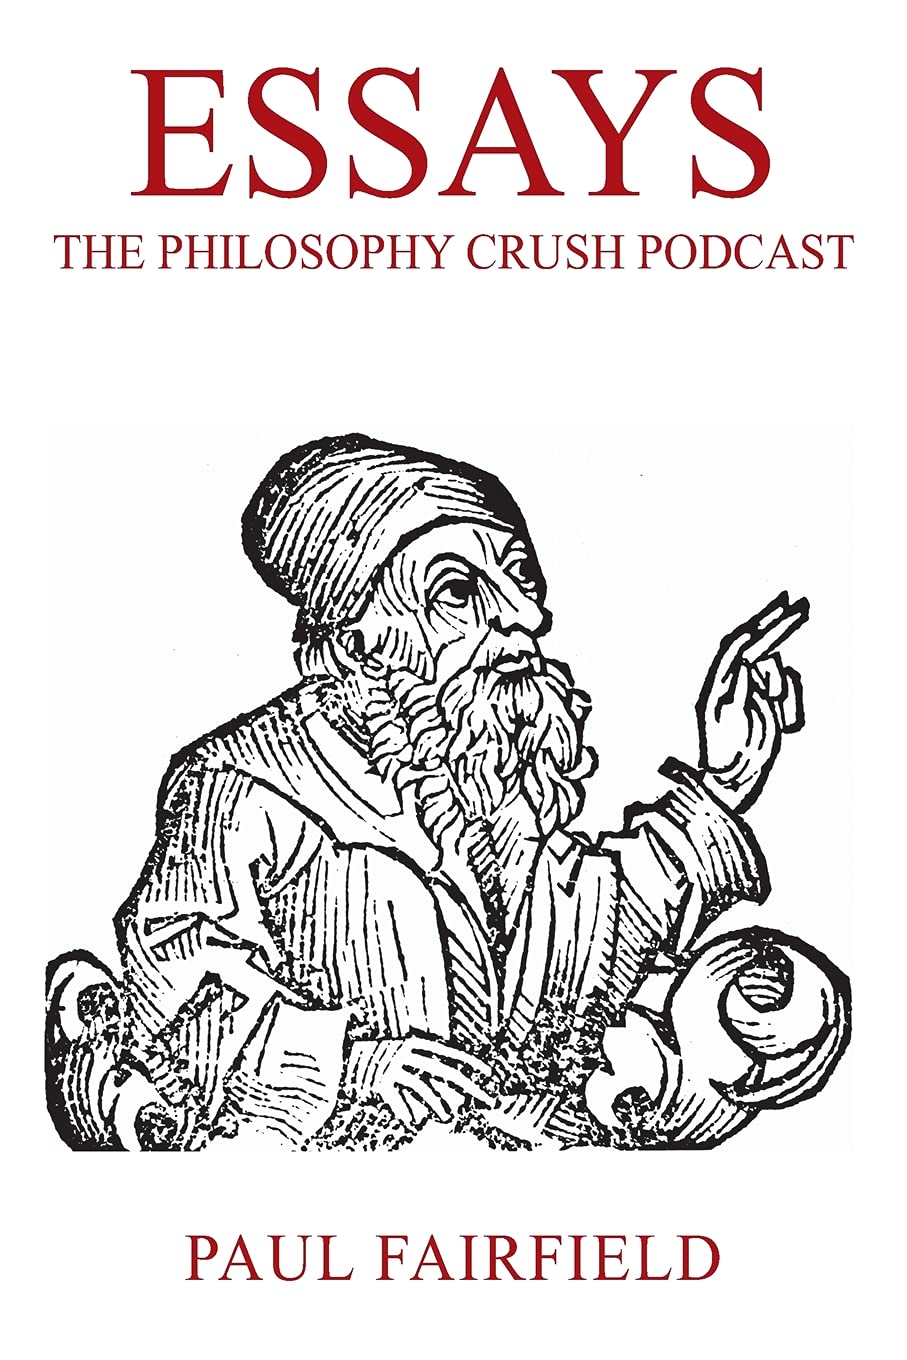 The philosophy Crush book is out on amazon